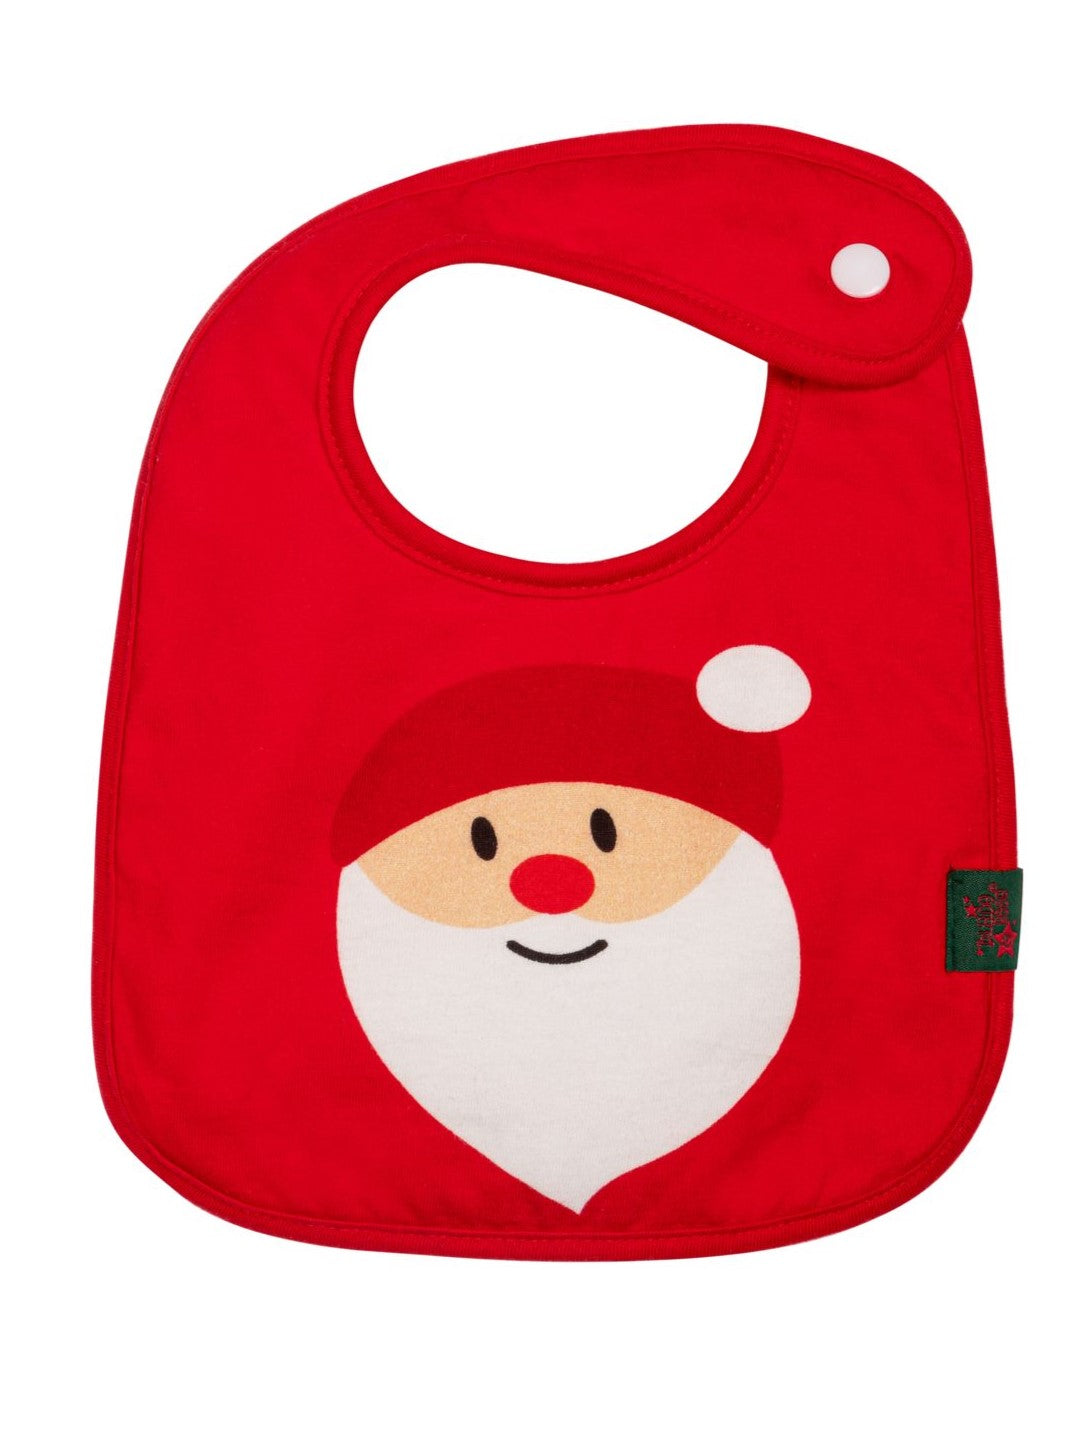 blade & rose christmas bibs at whippersnappers online